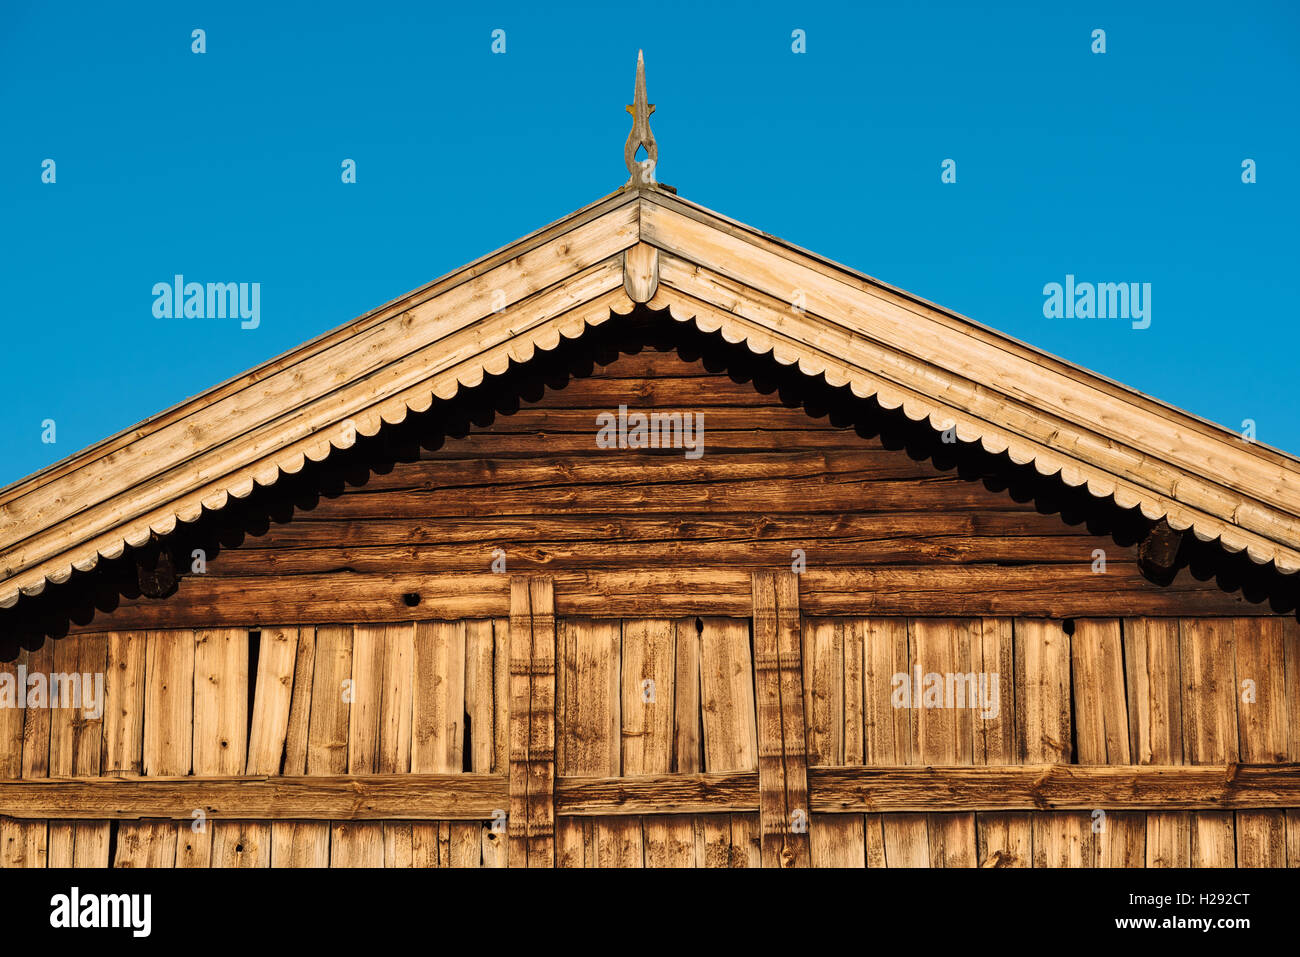 Wooden gable, old storehouse, Uvdal, Numedal, Norway Stock Photo